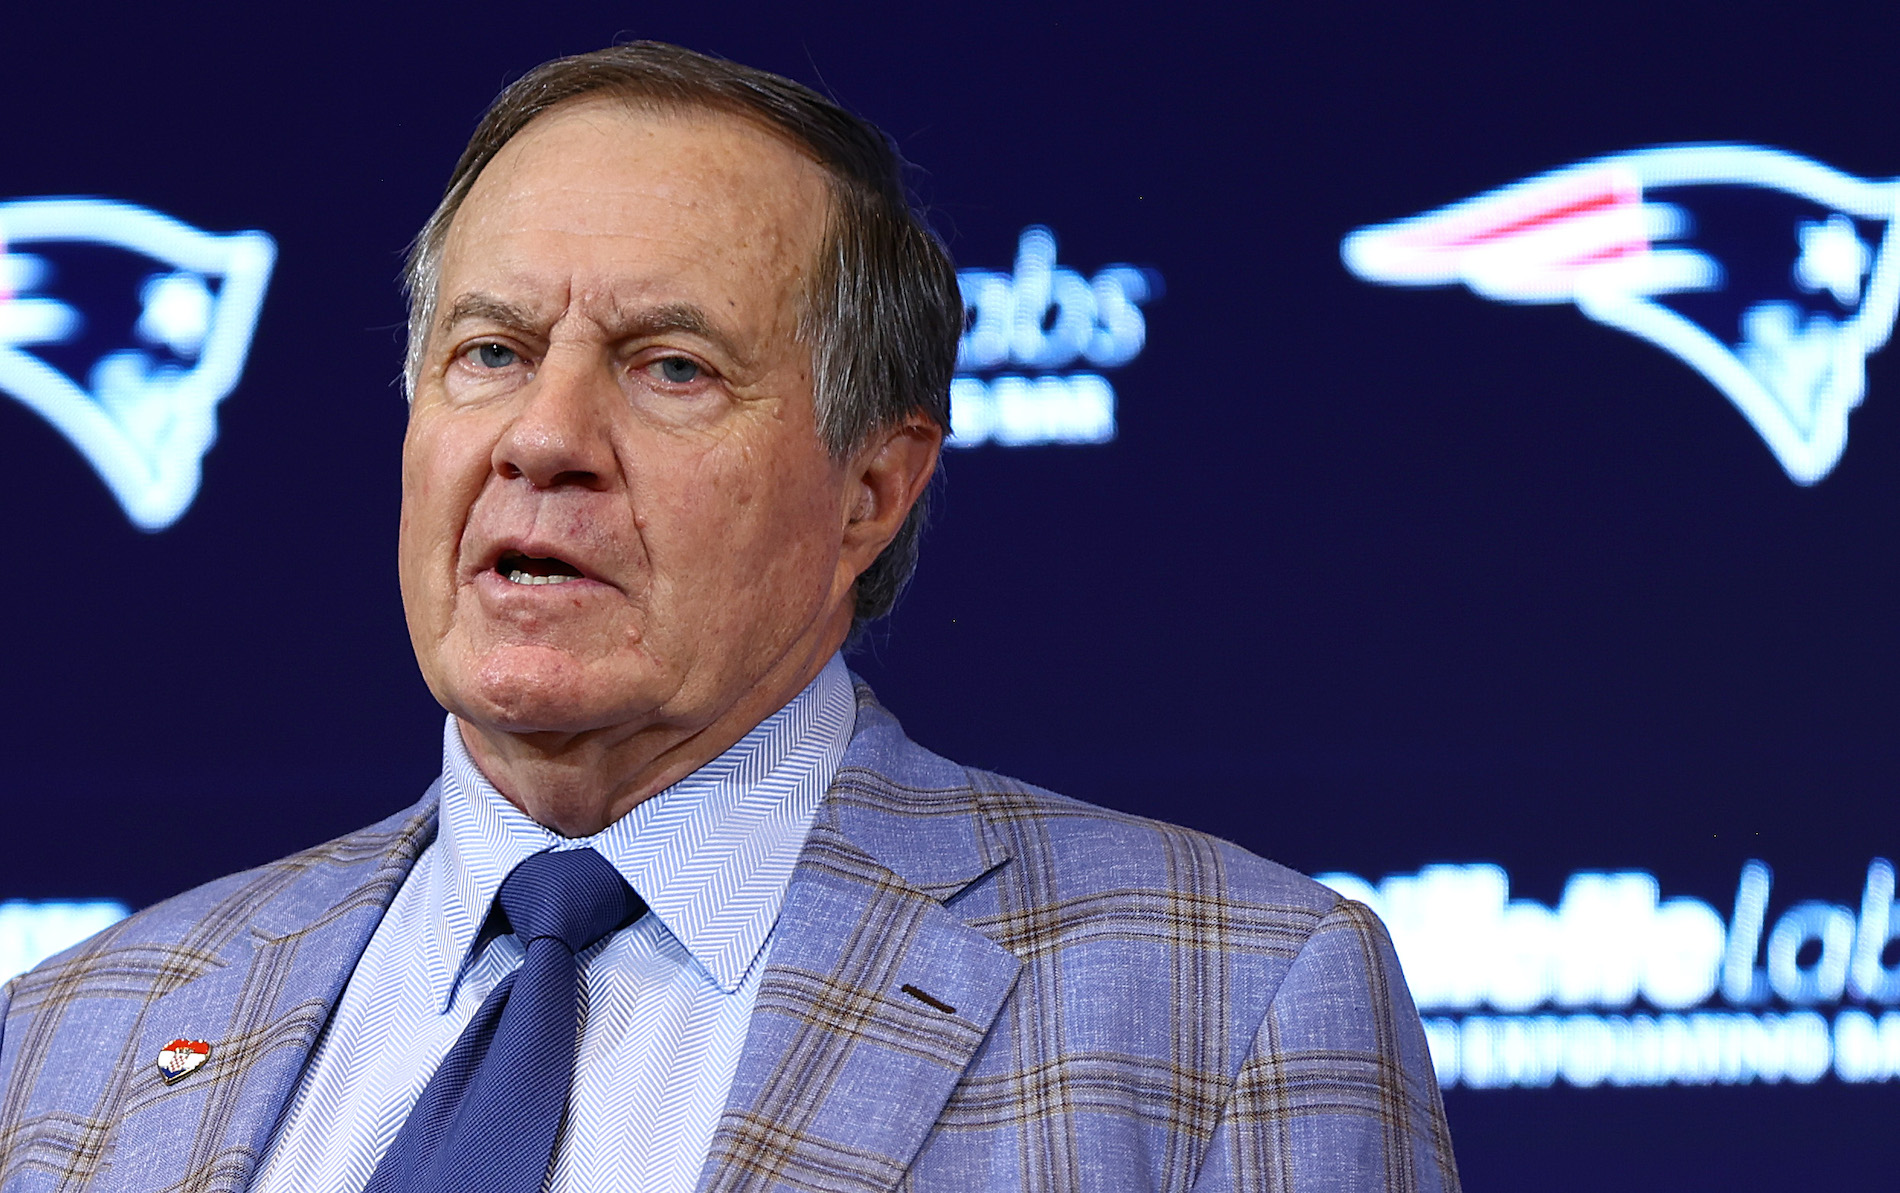 Bill Belichick at a press conference for the Patriots.